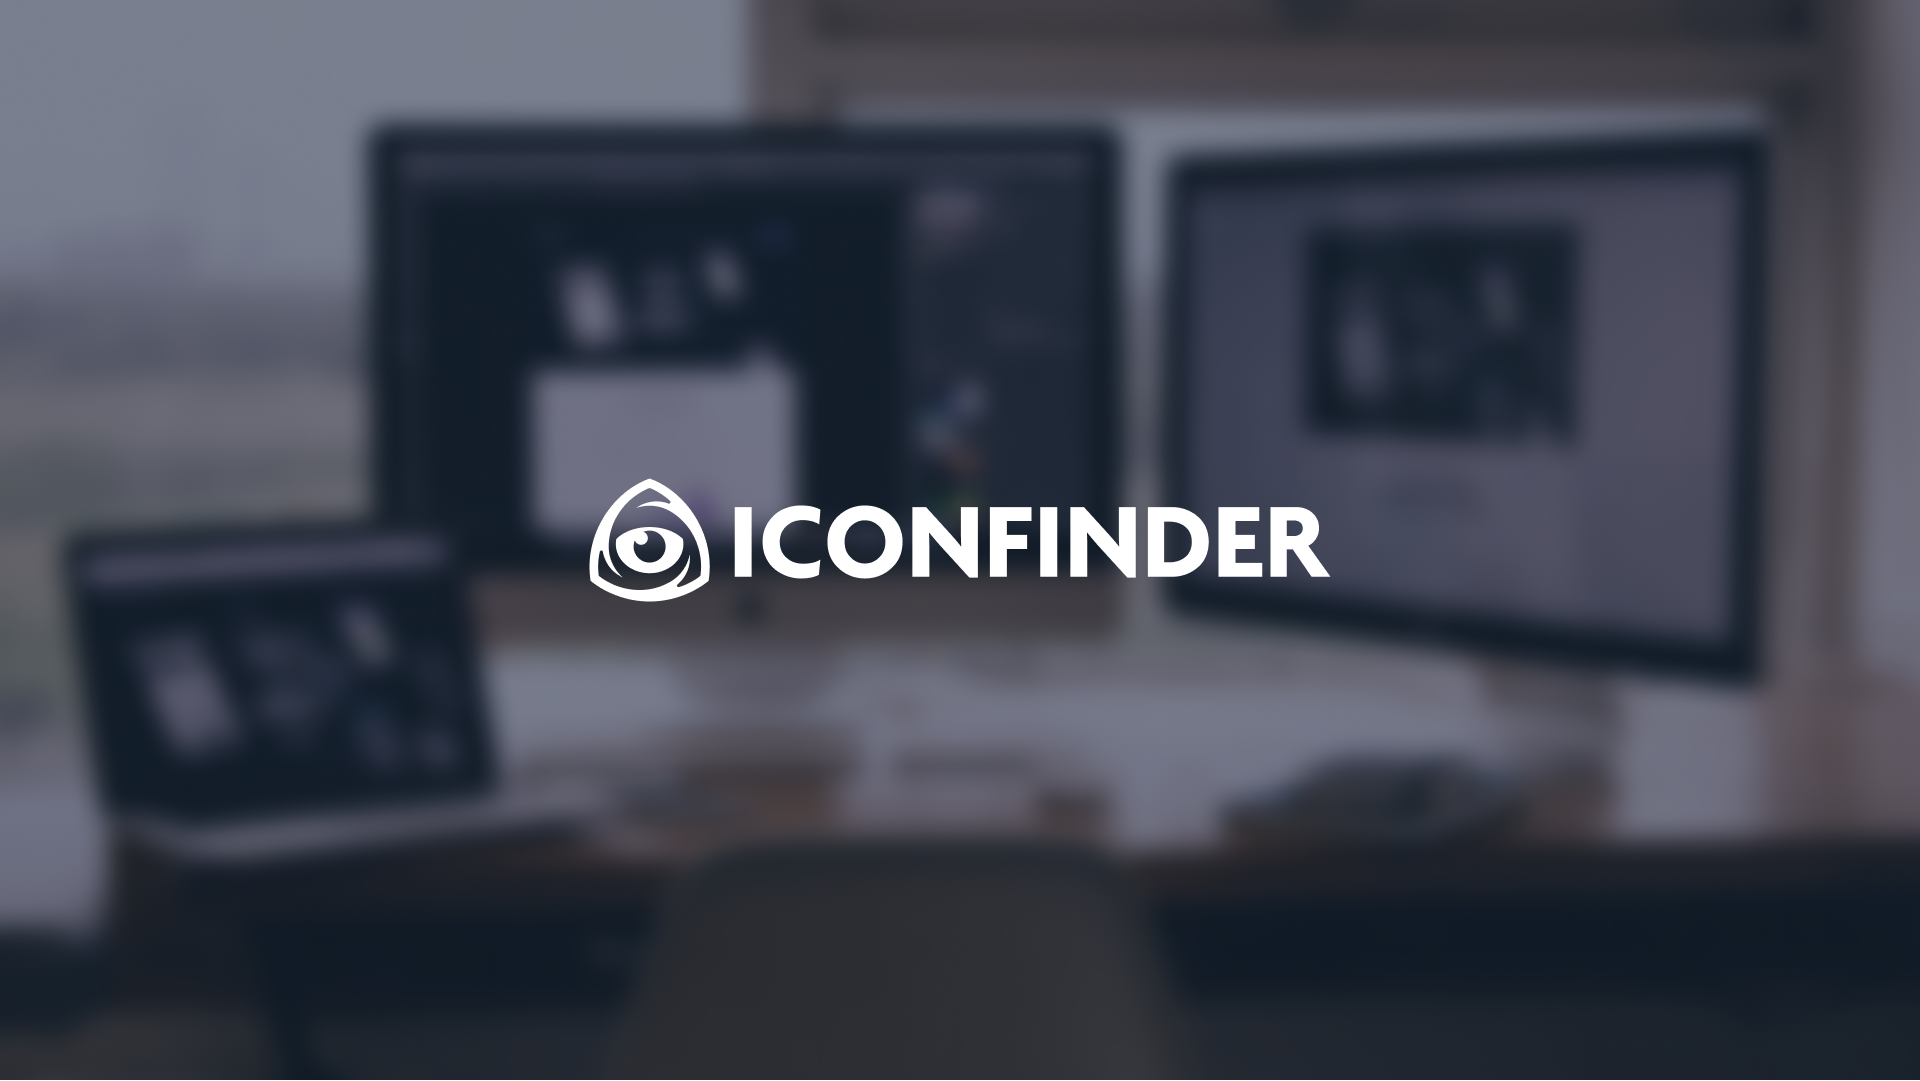 Iconfinder uses GraphCMS to power digital experiences